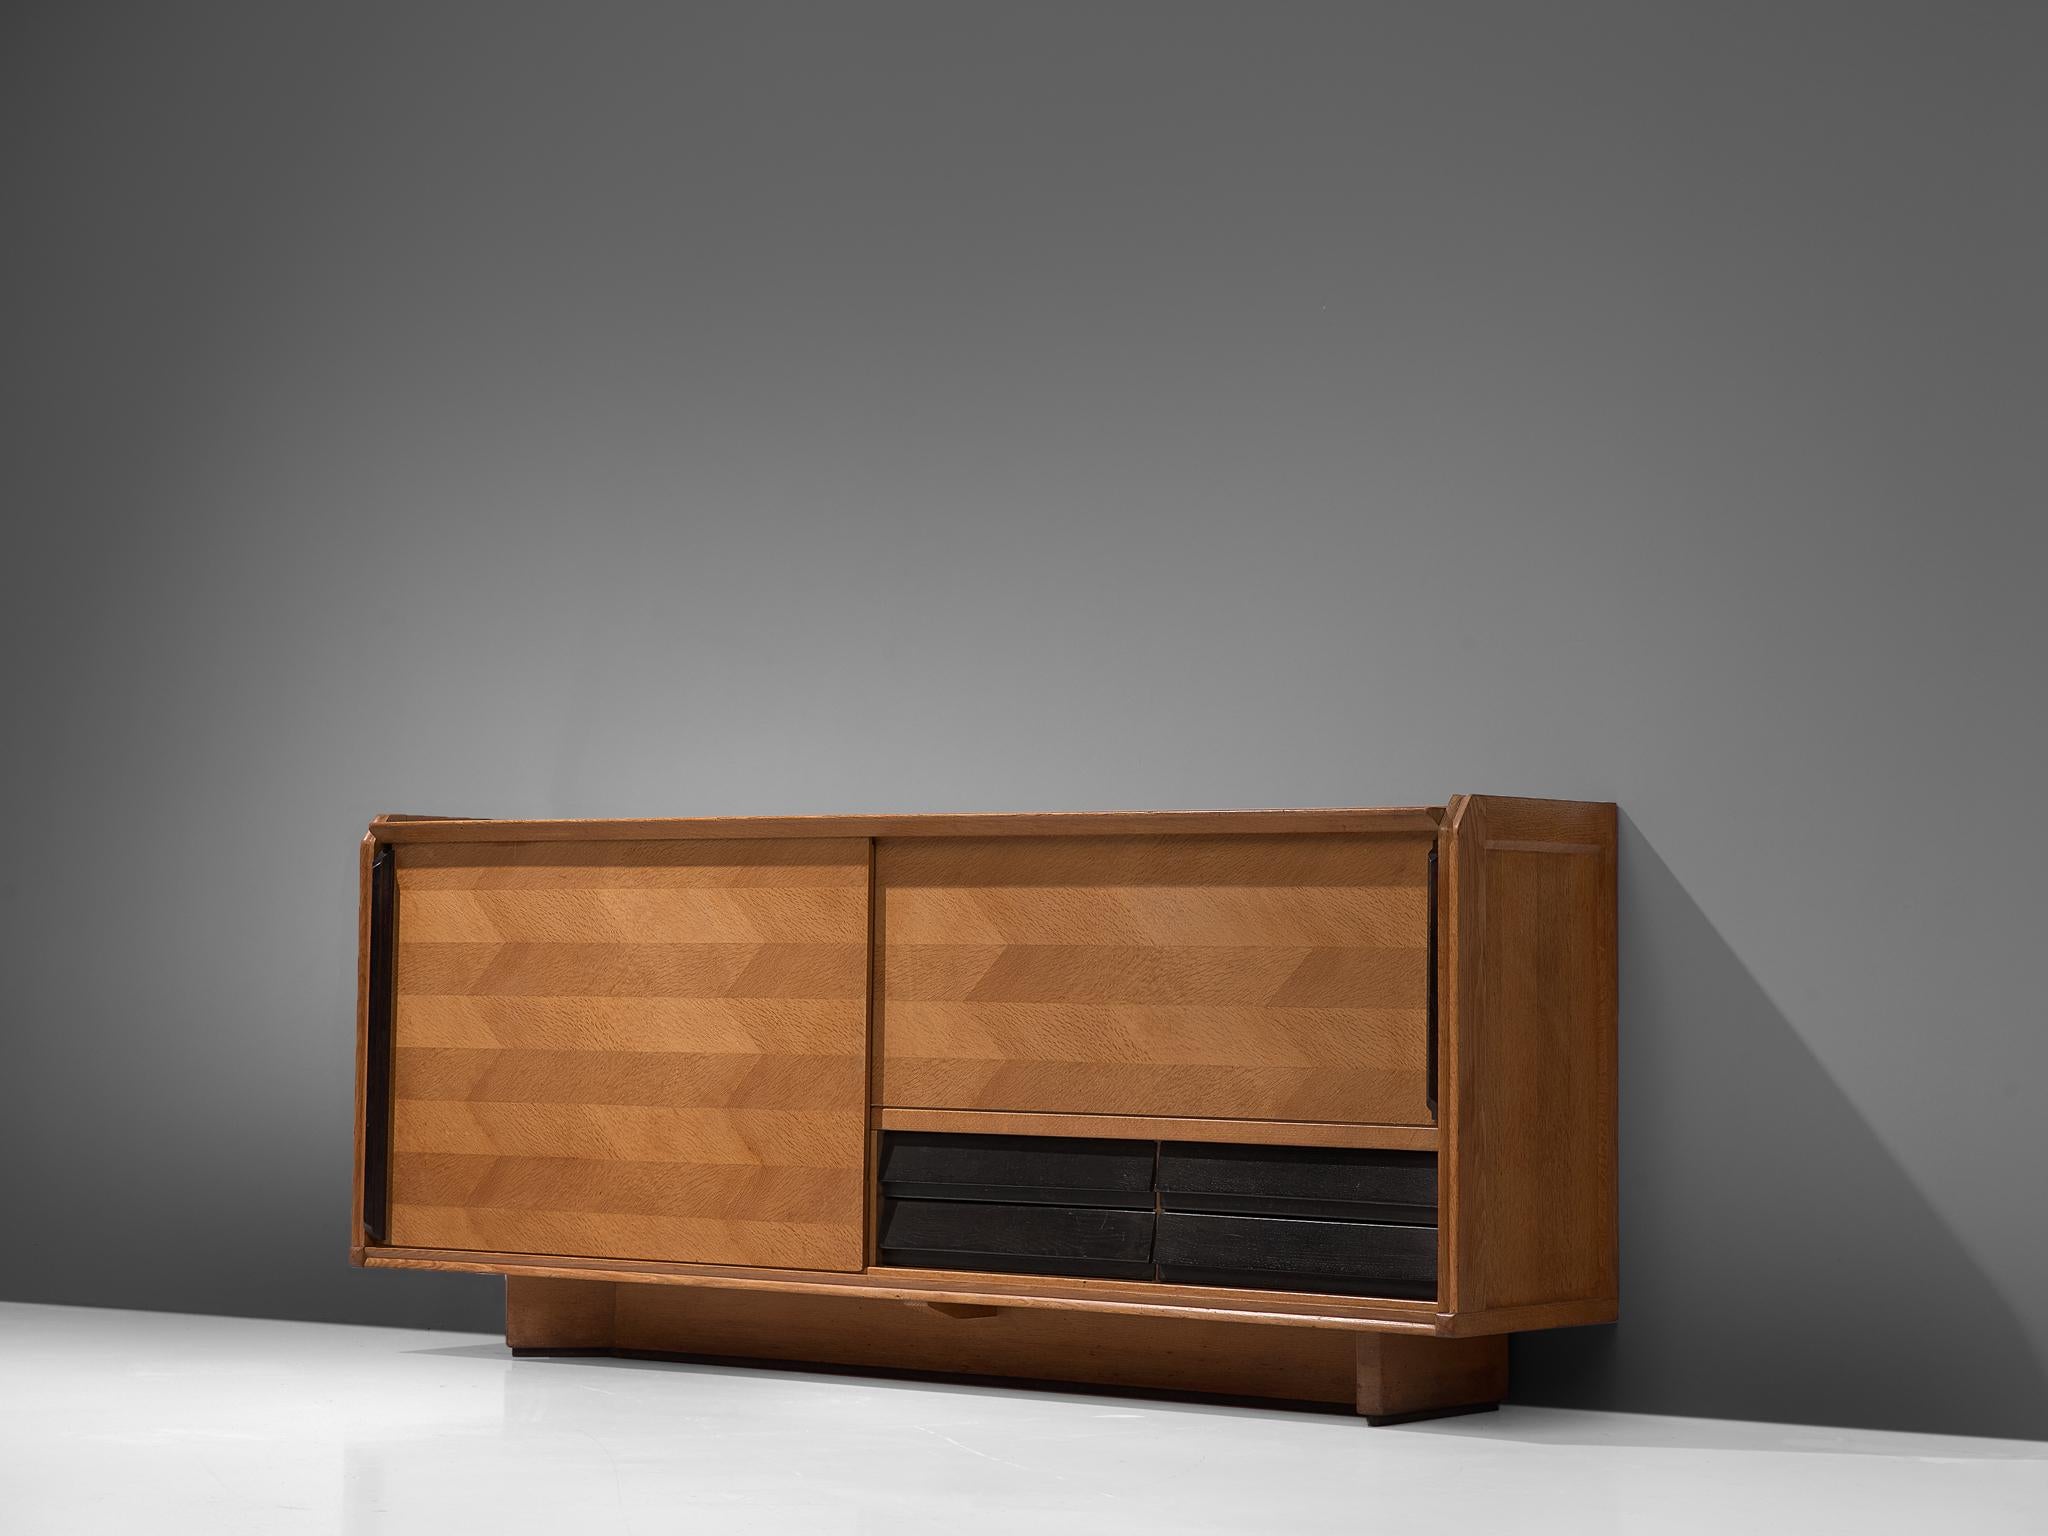 Guillerme et Chambron for Votre Maison, credenza, oak, France, 1960s.

Elegant sideboard designed by the French designer duo Guillerme and Chambron. The sideboard is characterized by the horizontal oakwood inlay patterns. The oak doors feature a